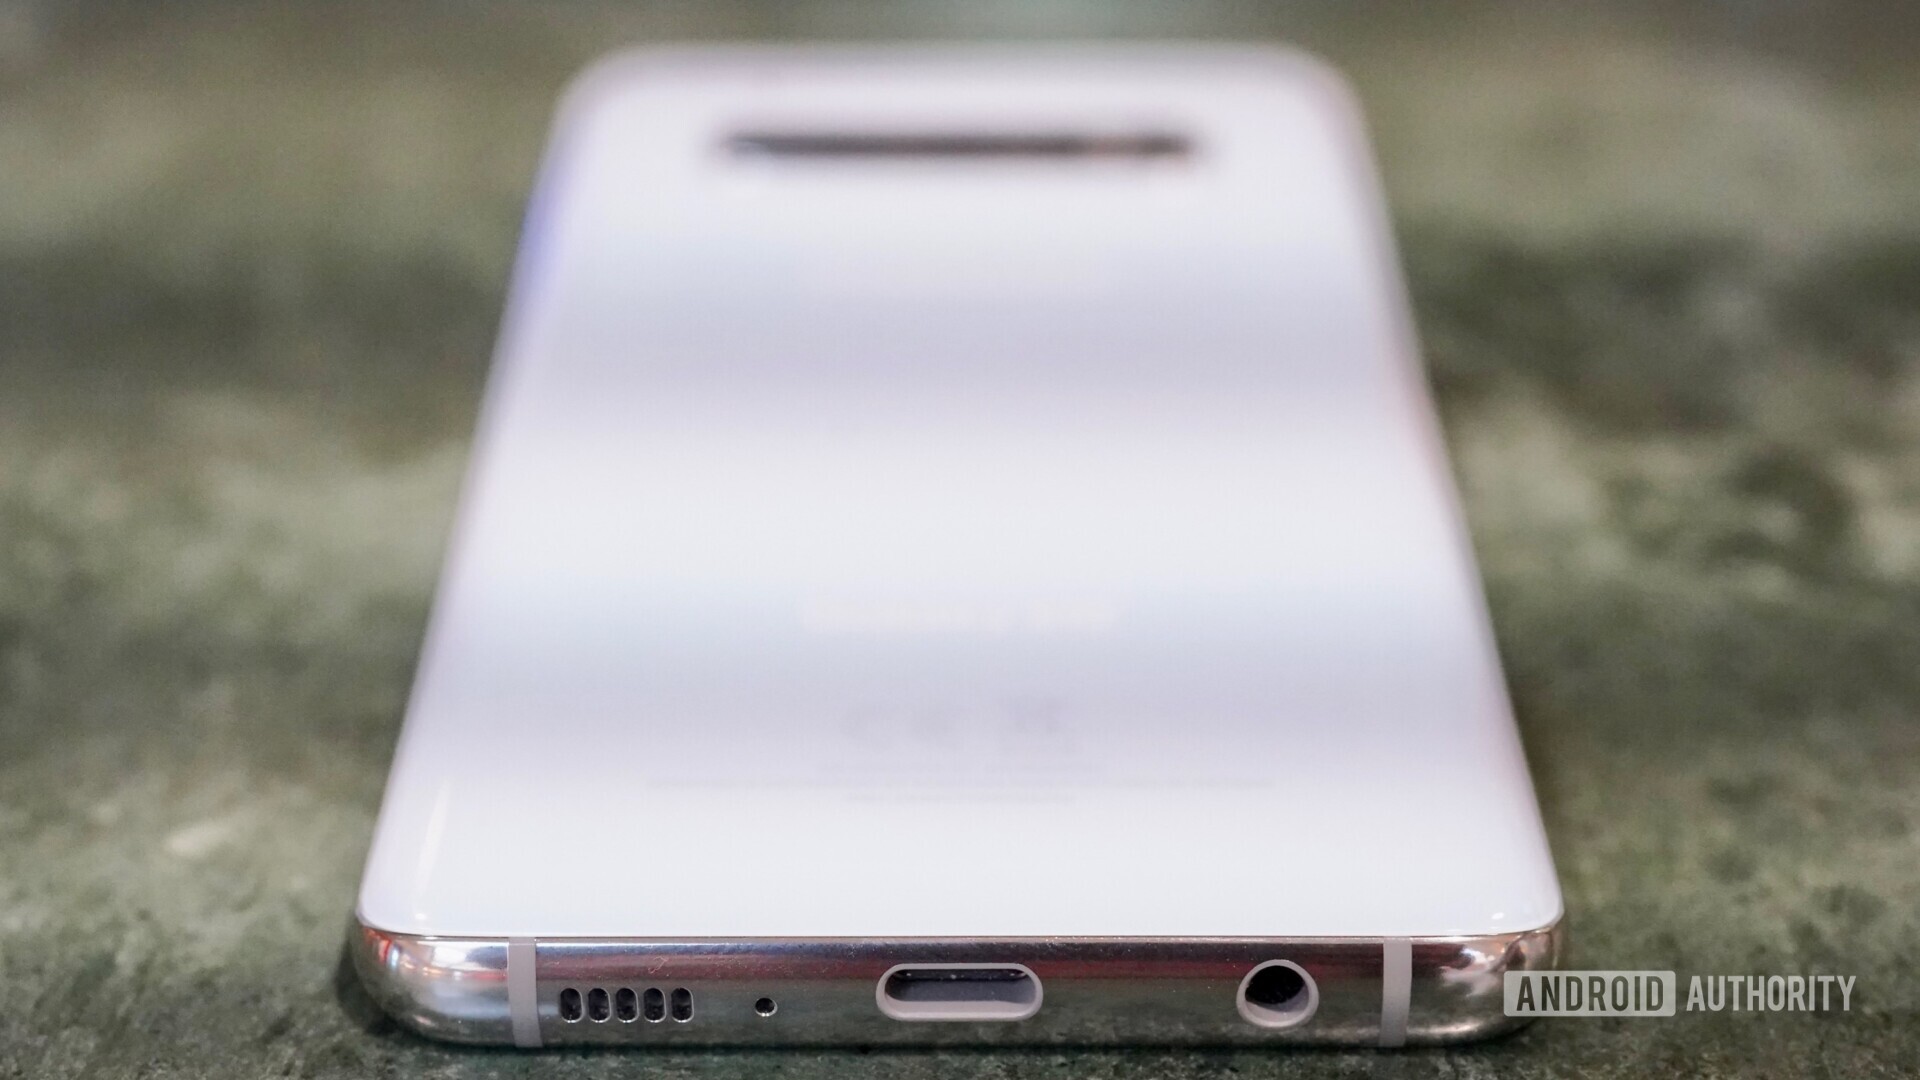 Photo of the Samsung Galaxy S10 focusing on the USB Type-C and headphone jack.